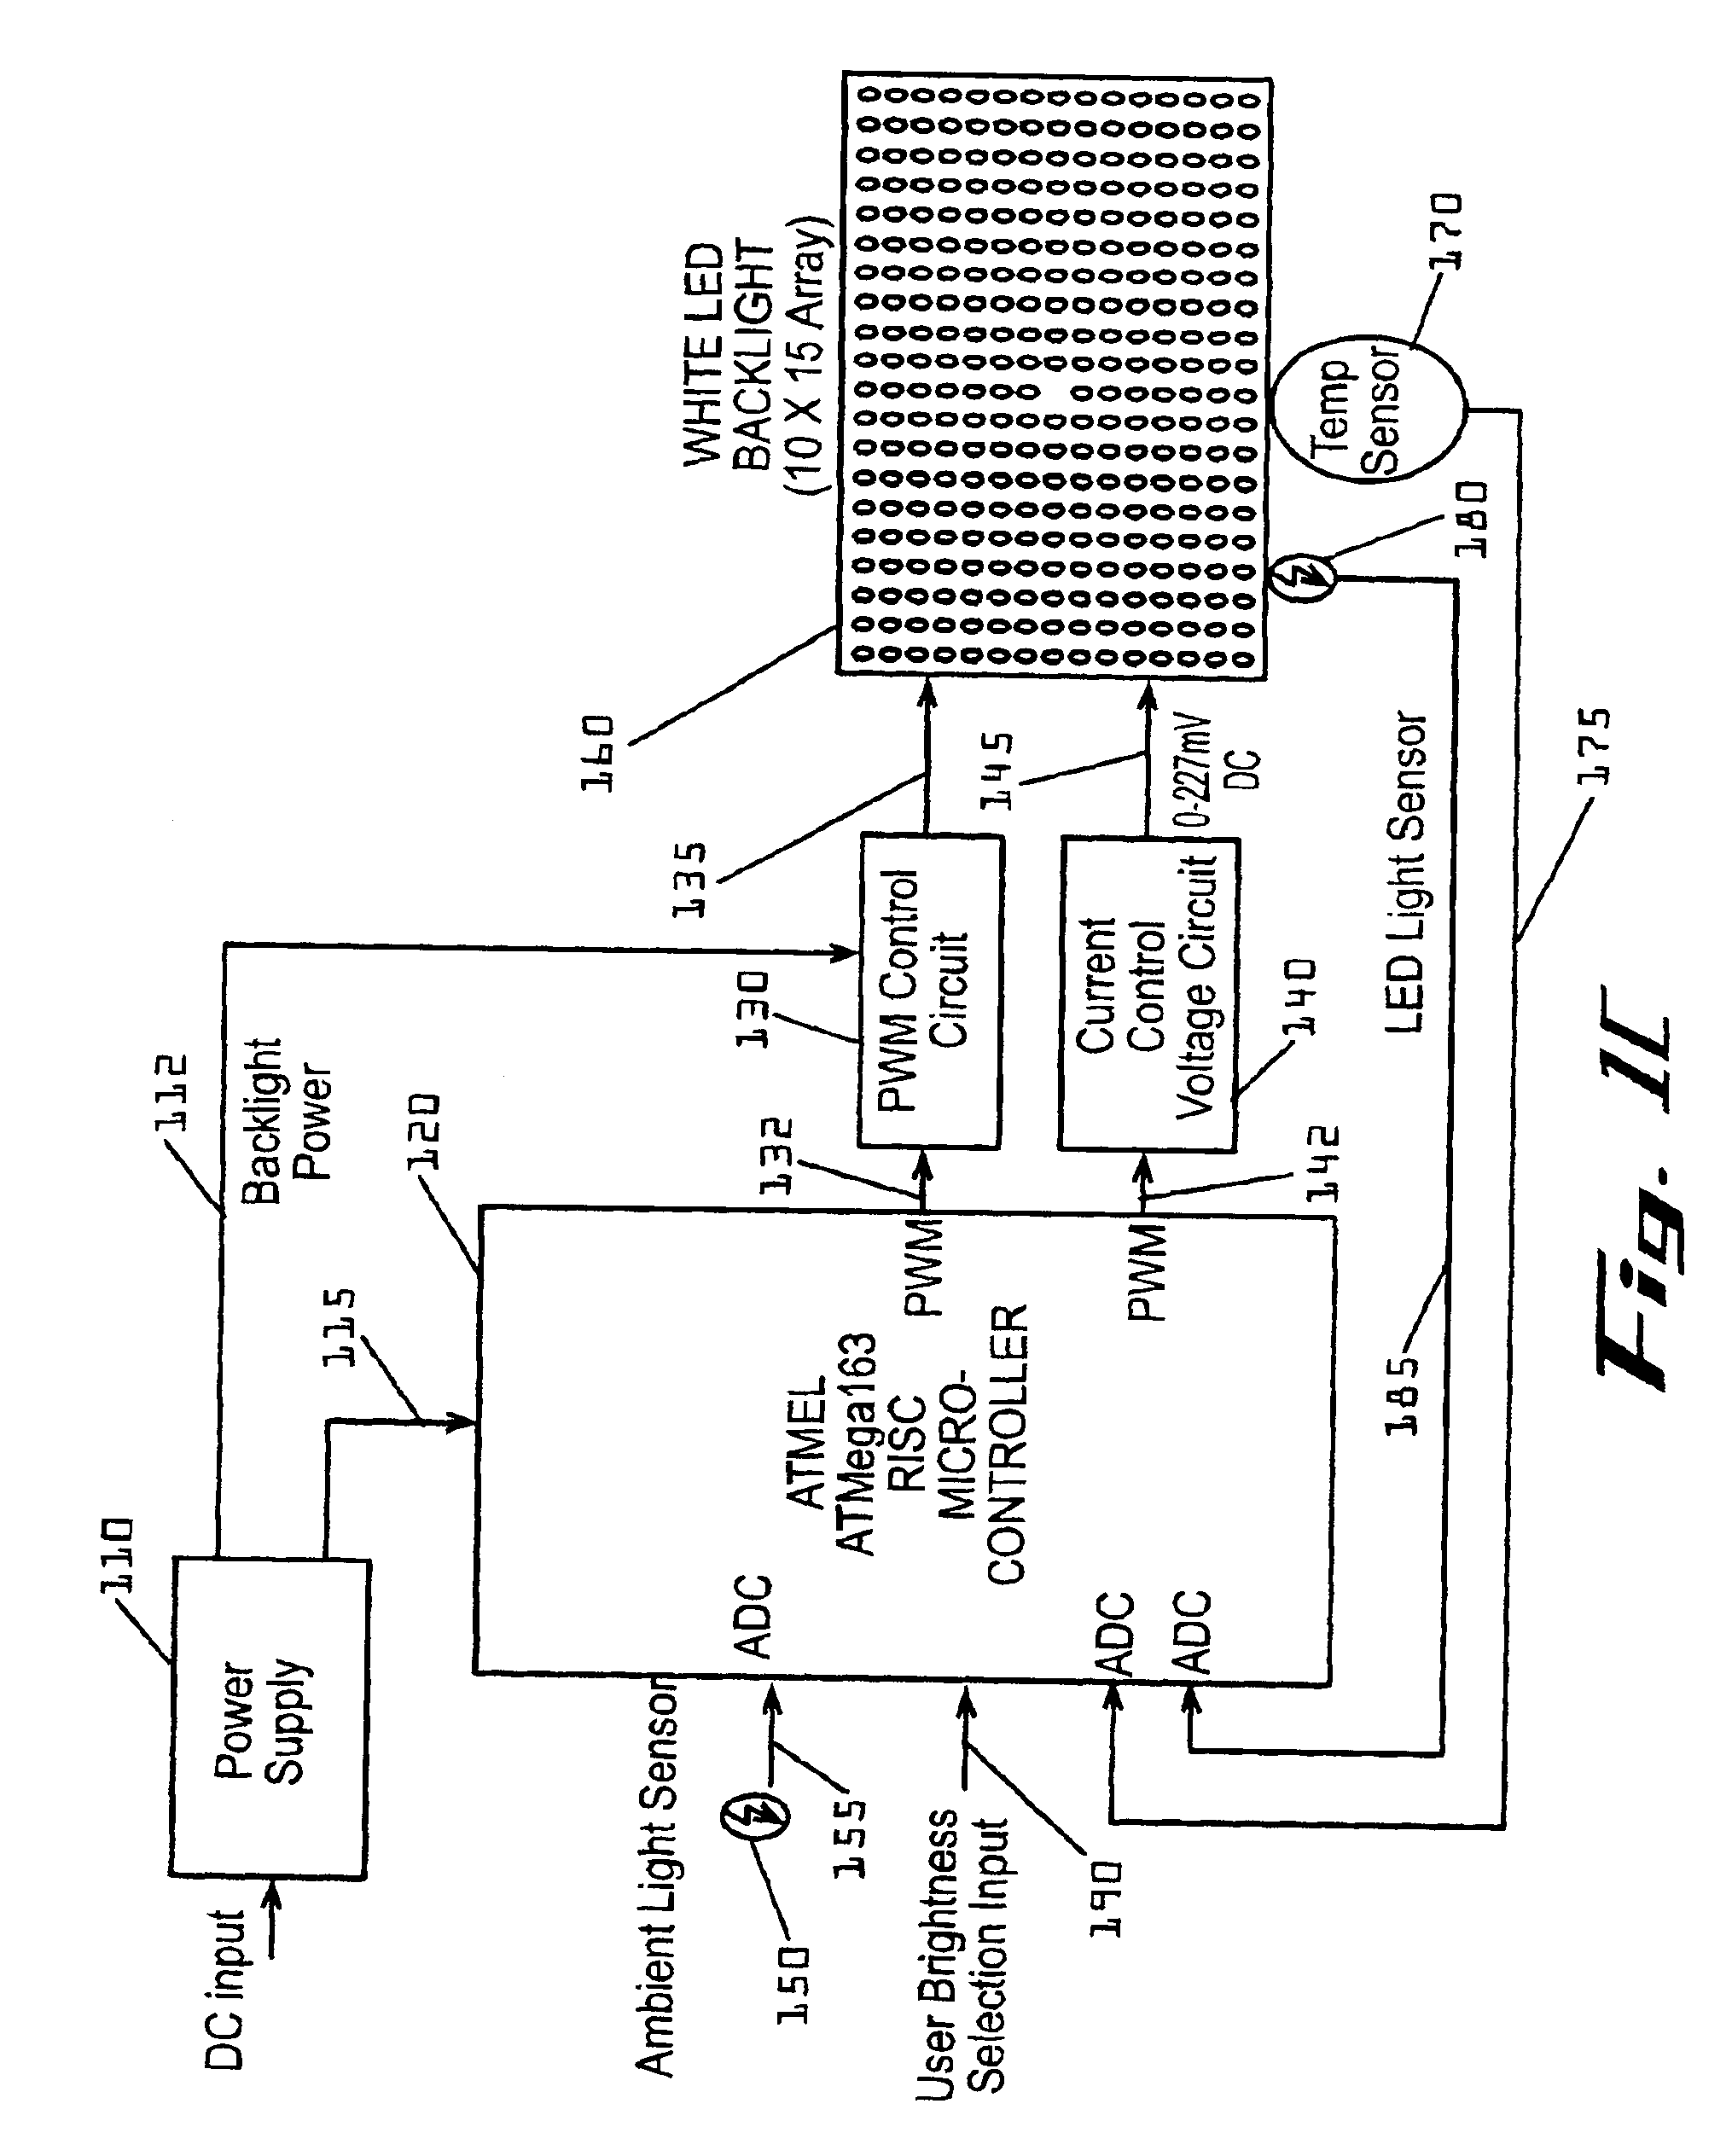 Systems and methods for controlling brightness of an avionics display